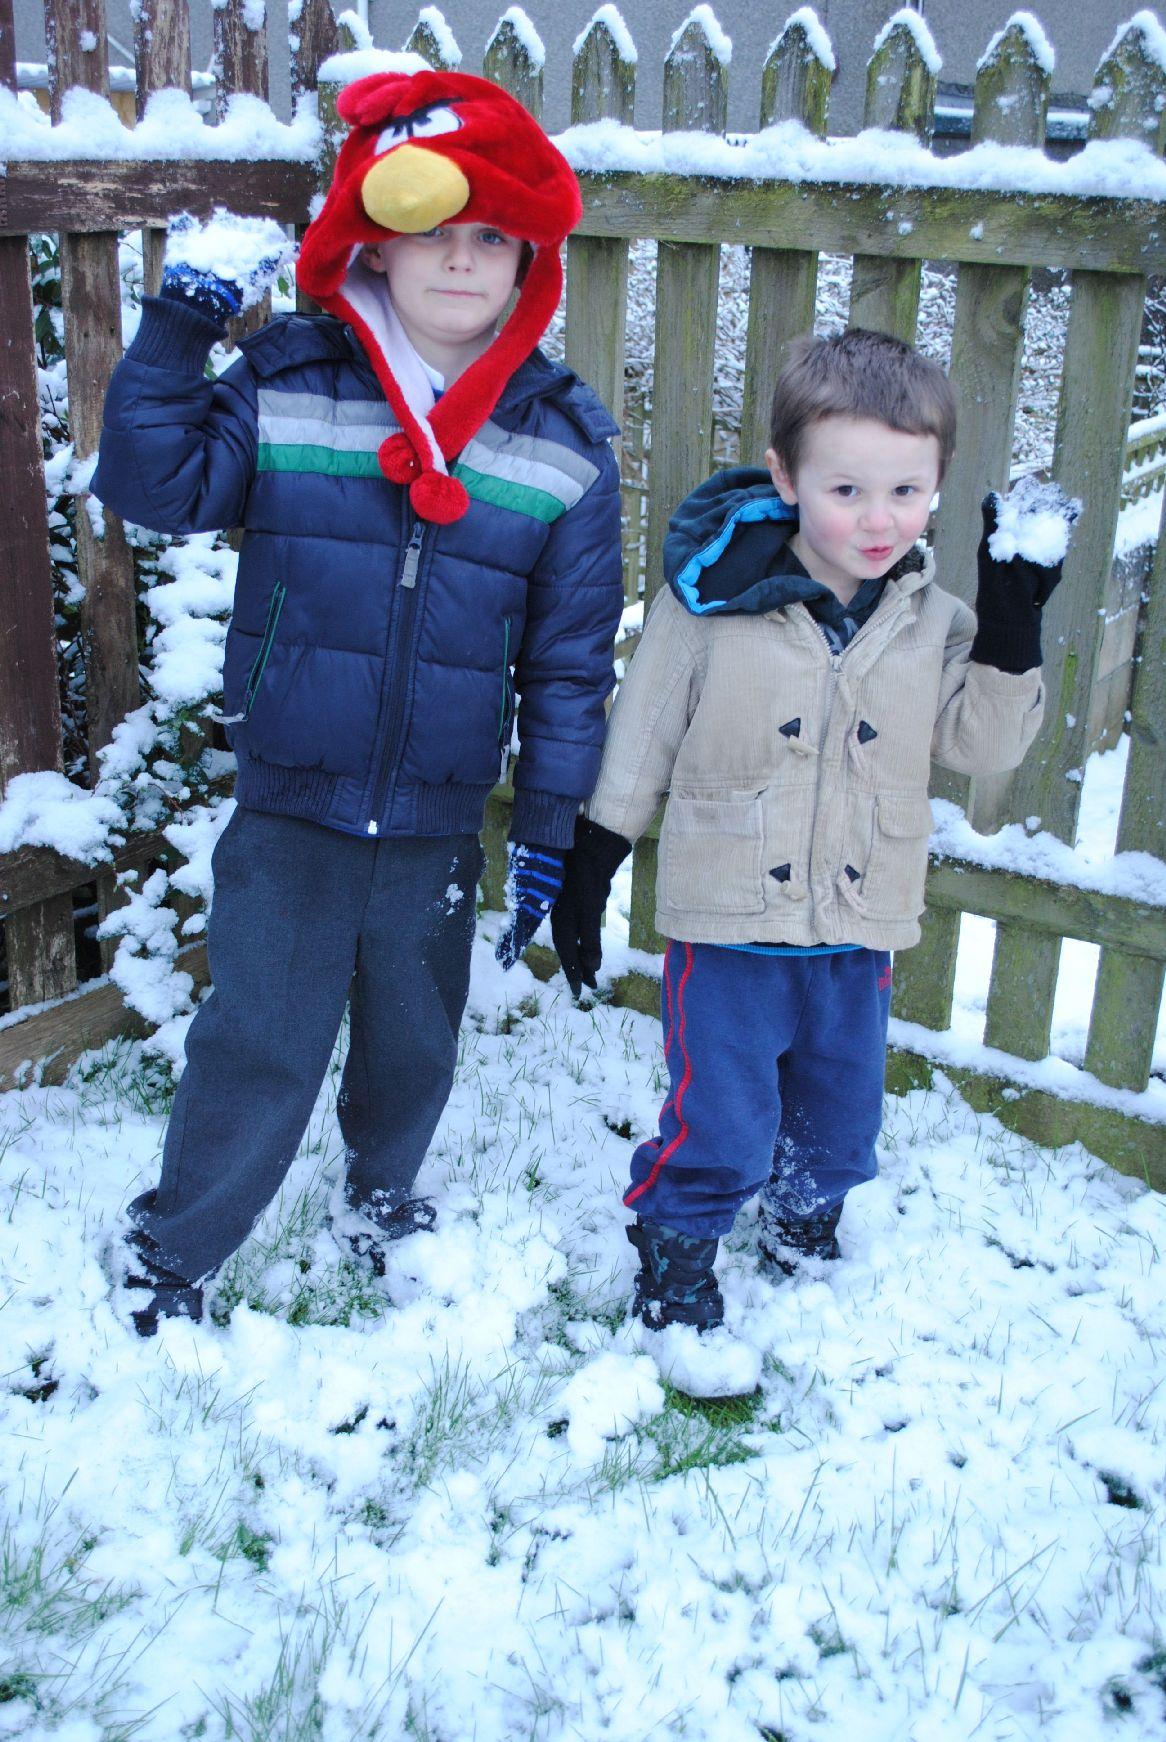 Helston youngsters Jake and Liam are ready for a snowball fight